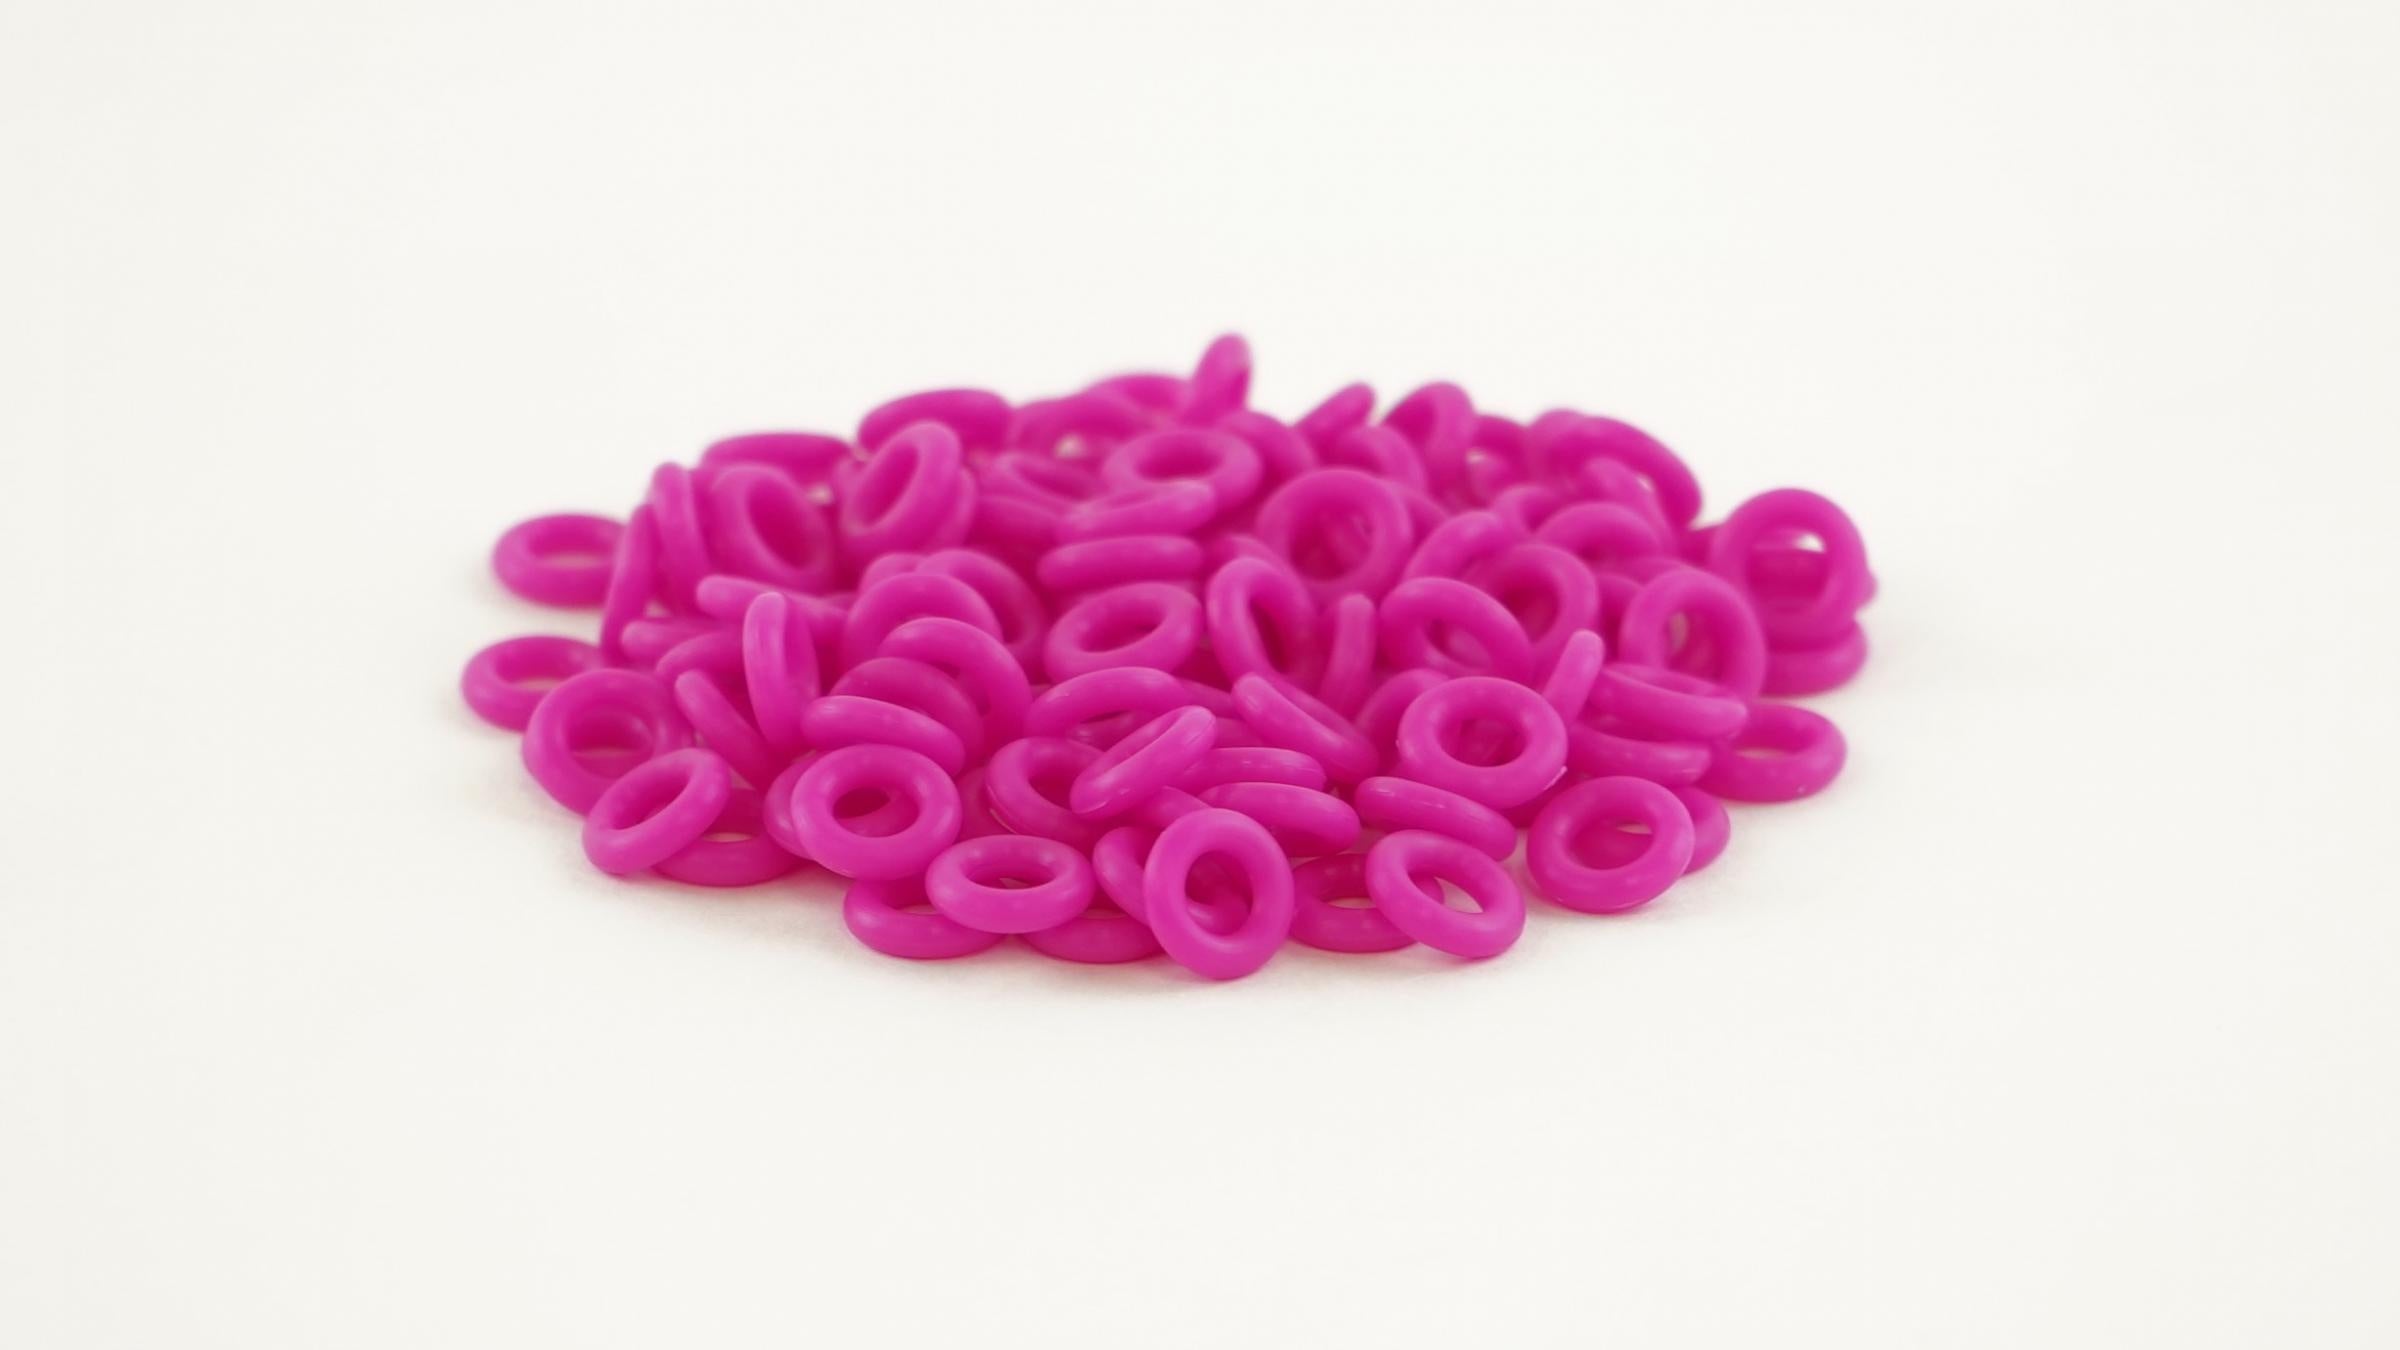 MK Pro Rings Silicone Switch Dampening O-rings 60A 2.5mm (120 Pack) MKSNPJHEZ0 |0|